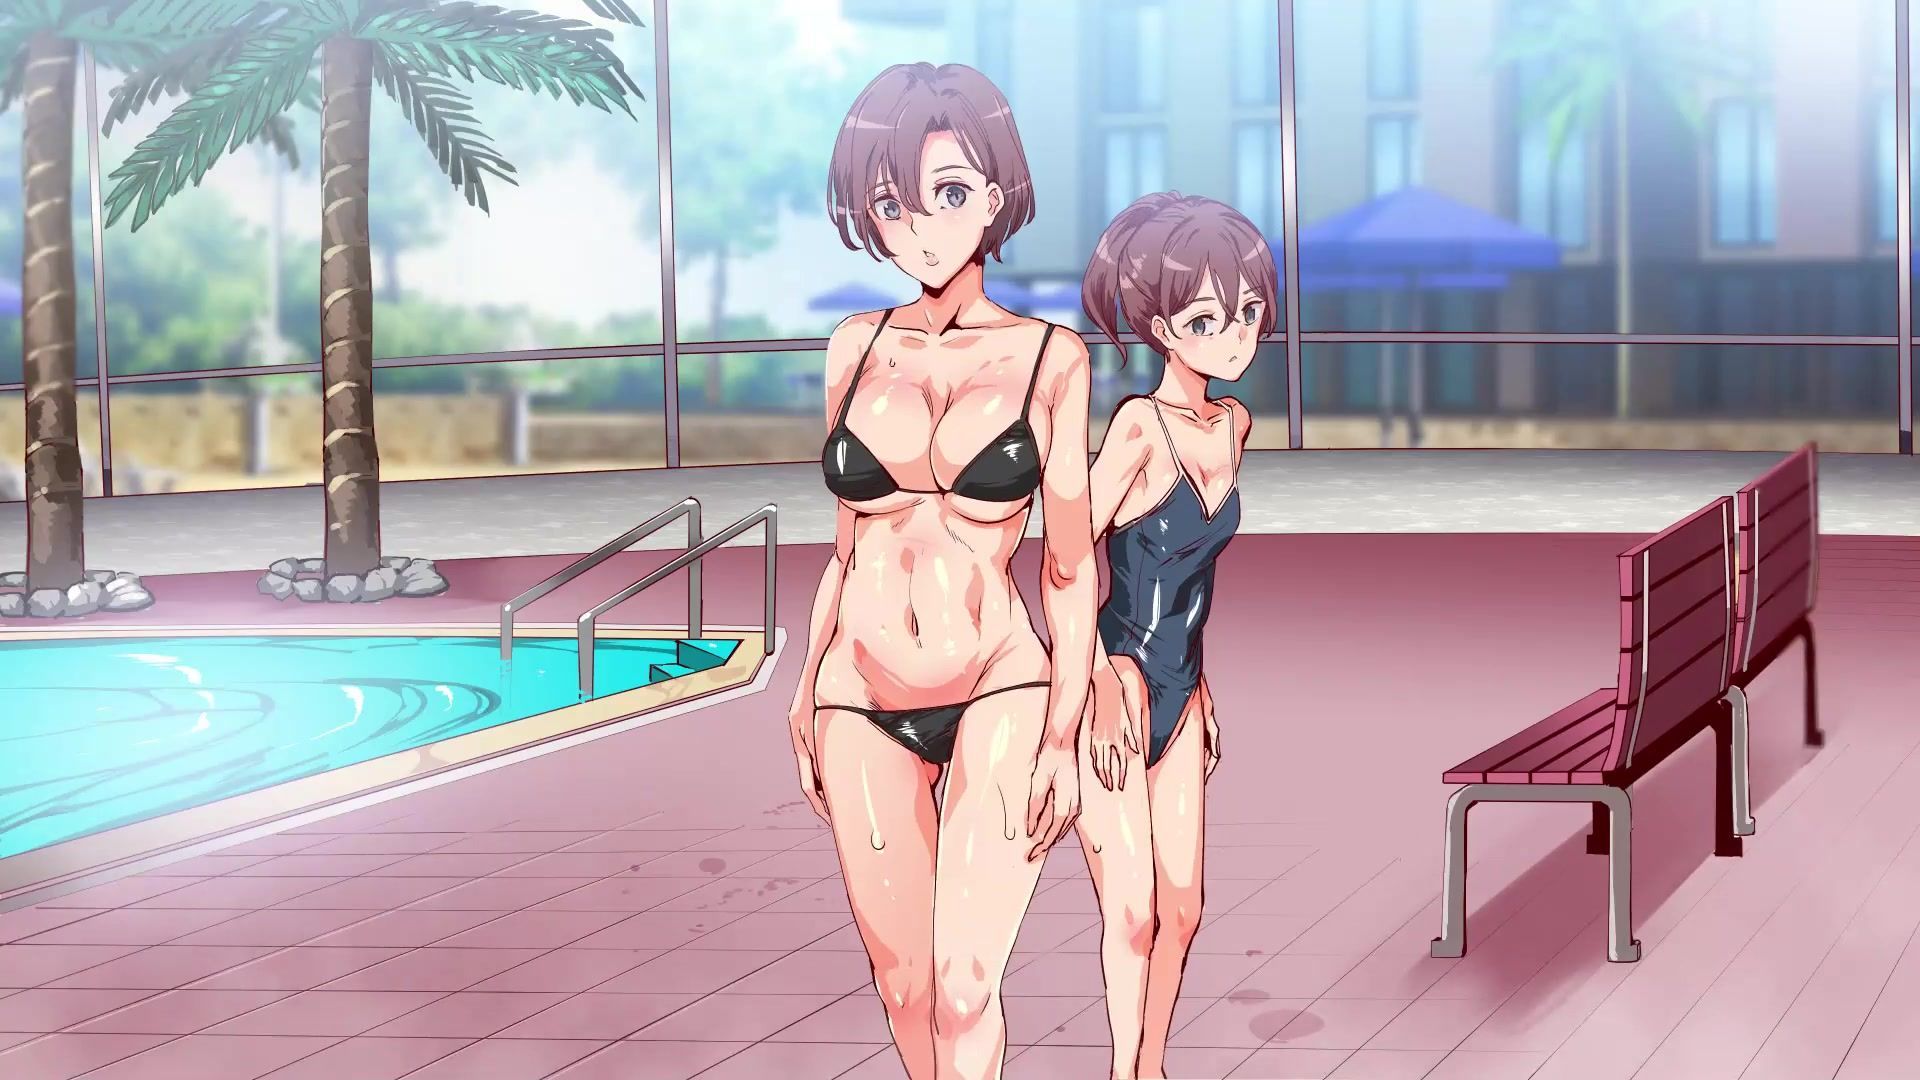 Tanned guy fucks young anime girls by the pool